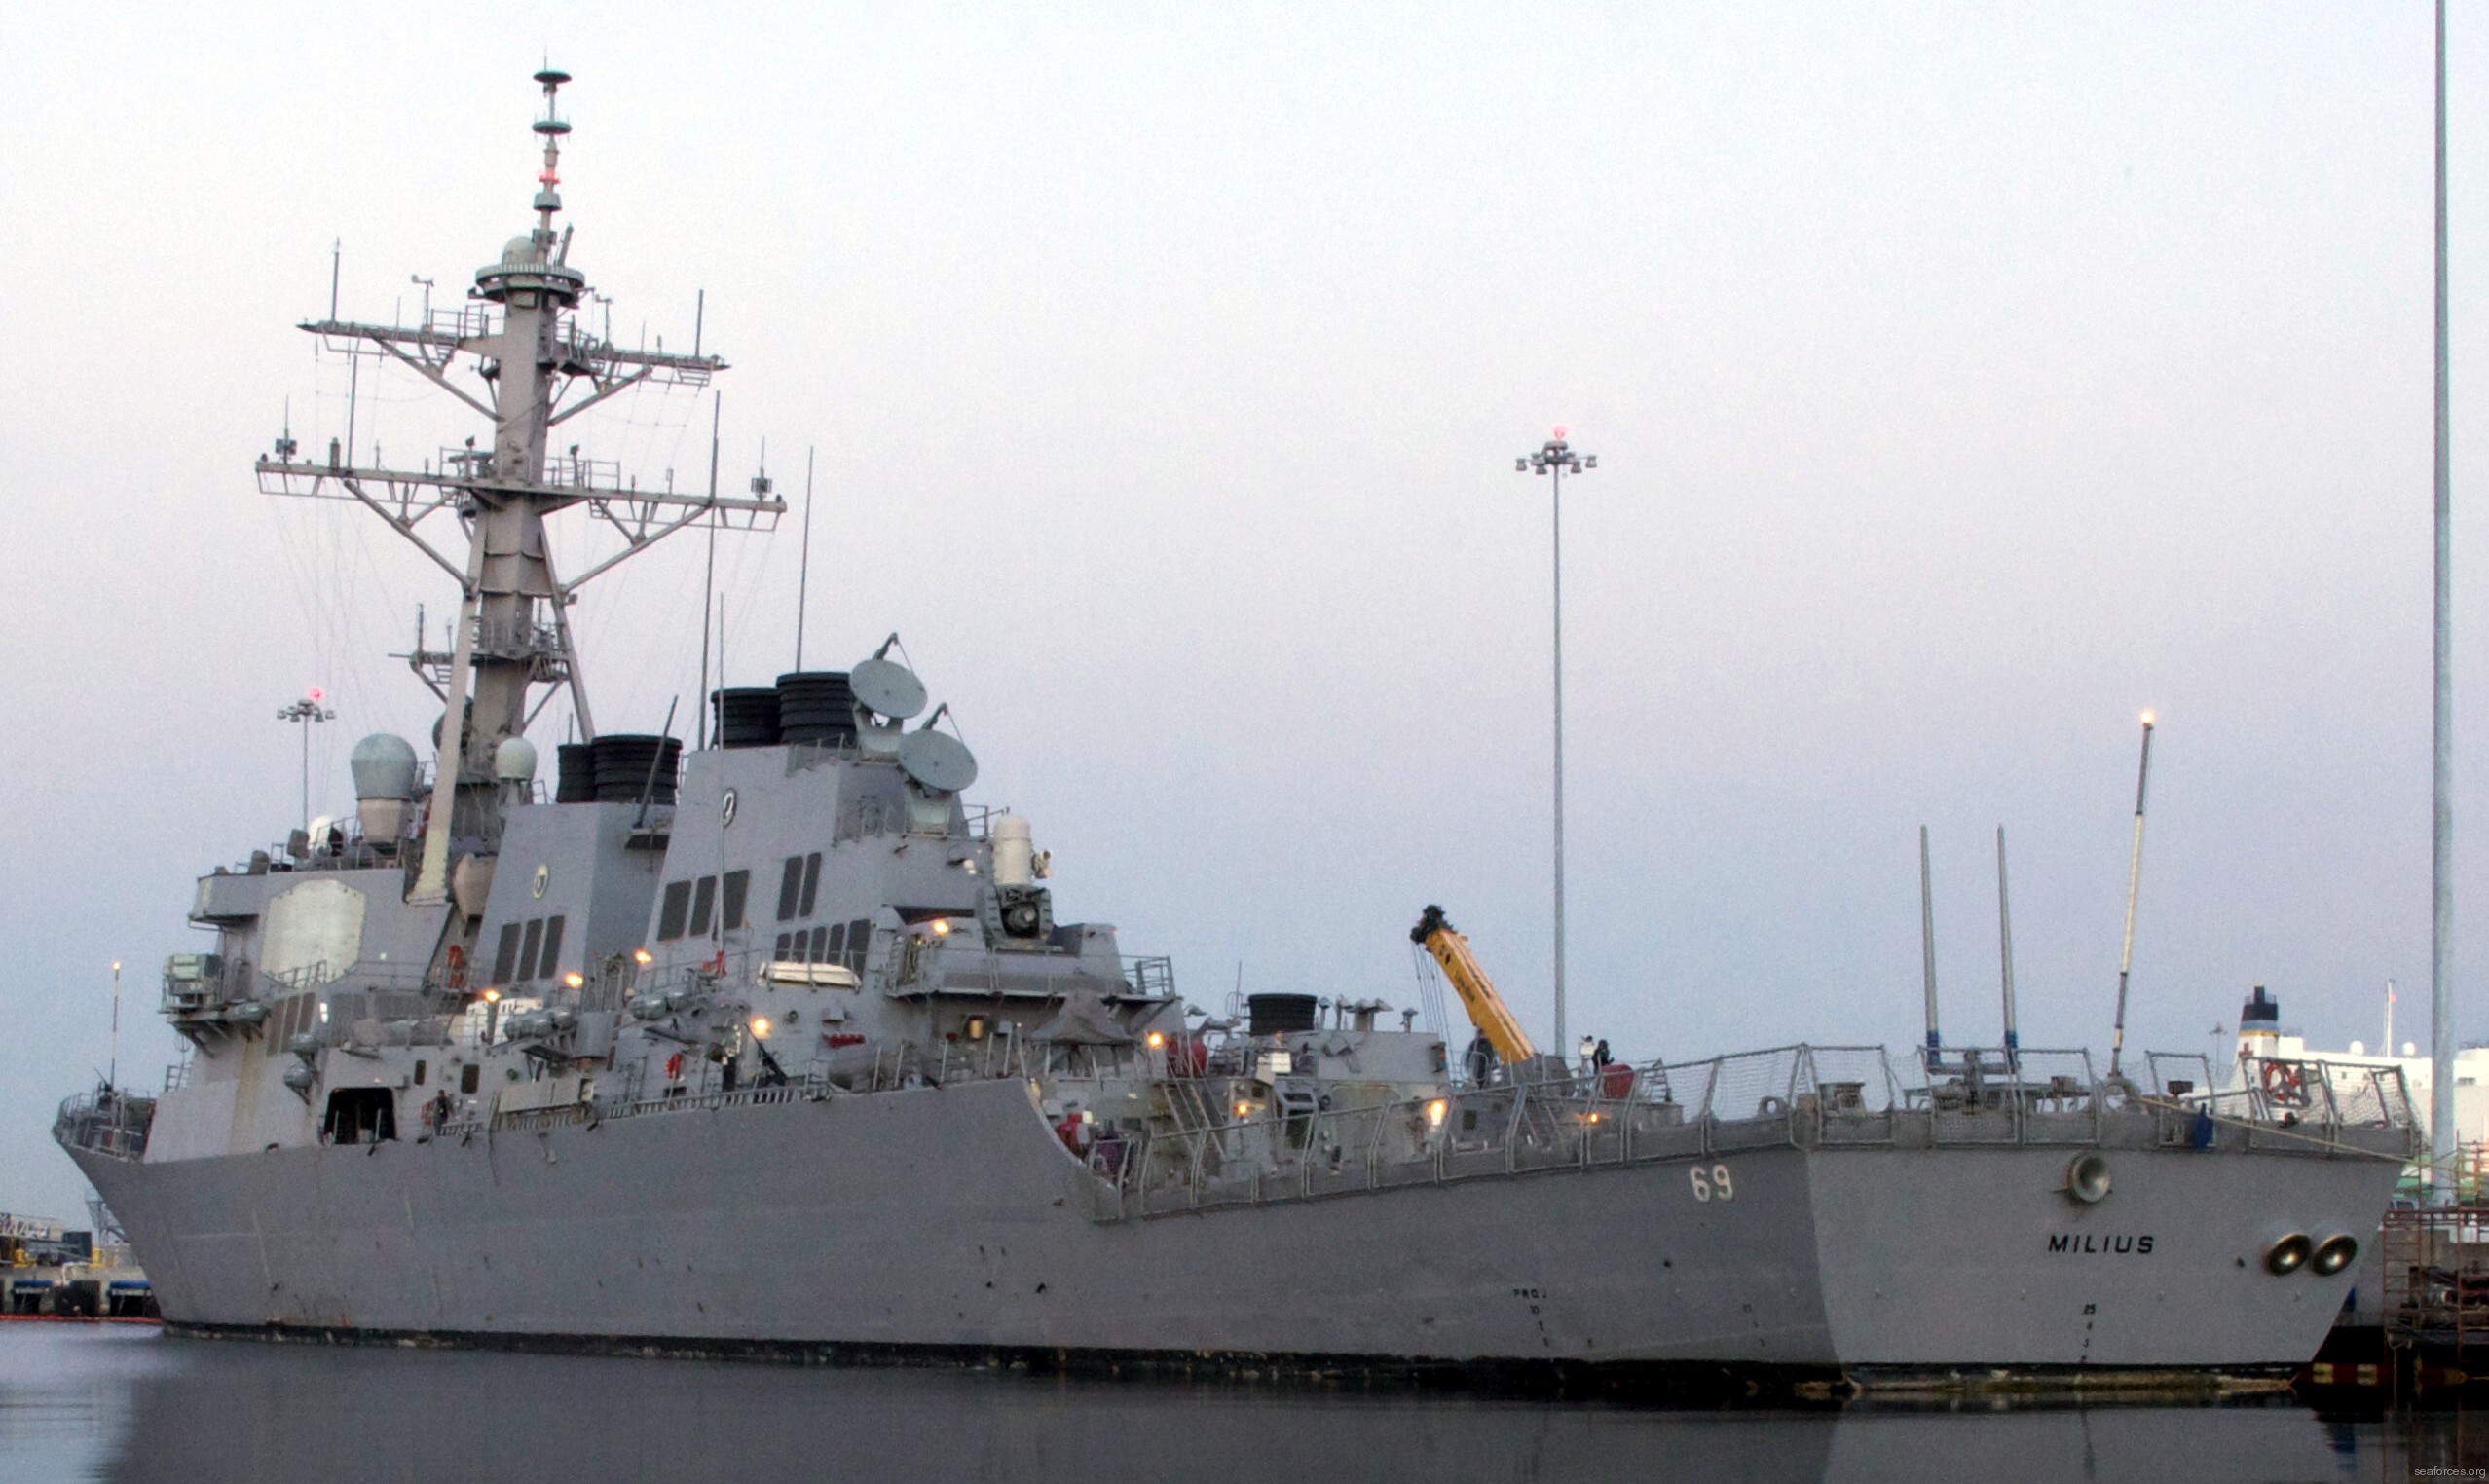 ddg-69 uss milius guided missile destroyer arleigh burke class aegis bmd 26